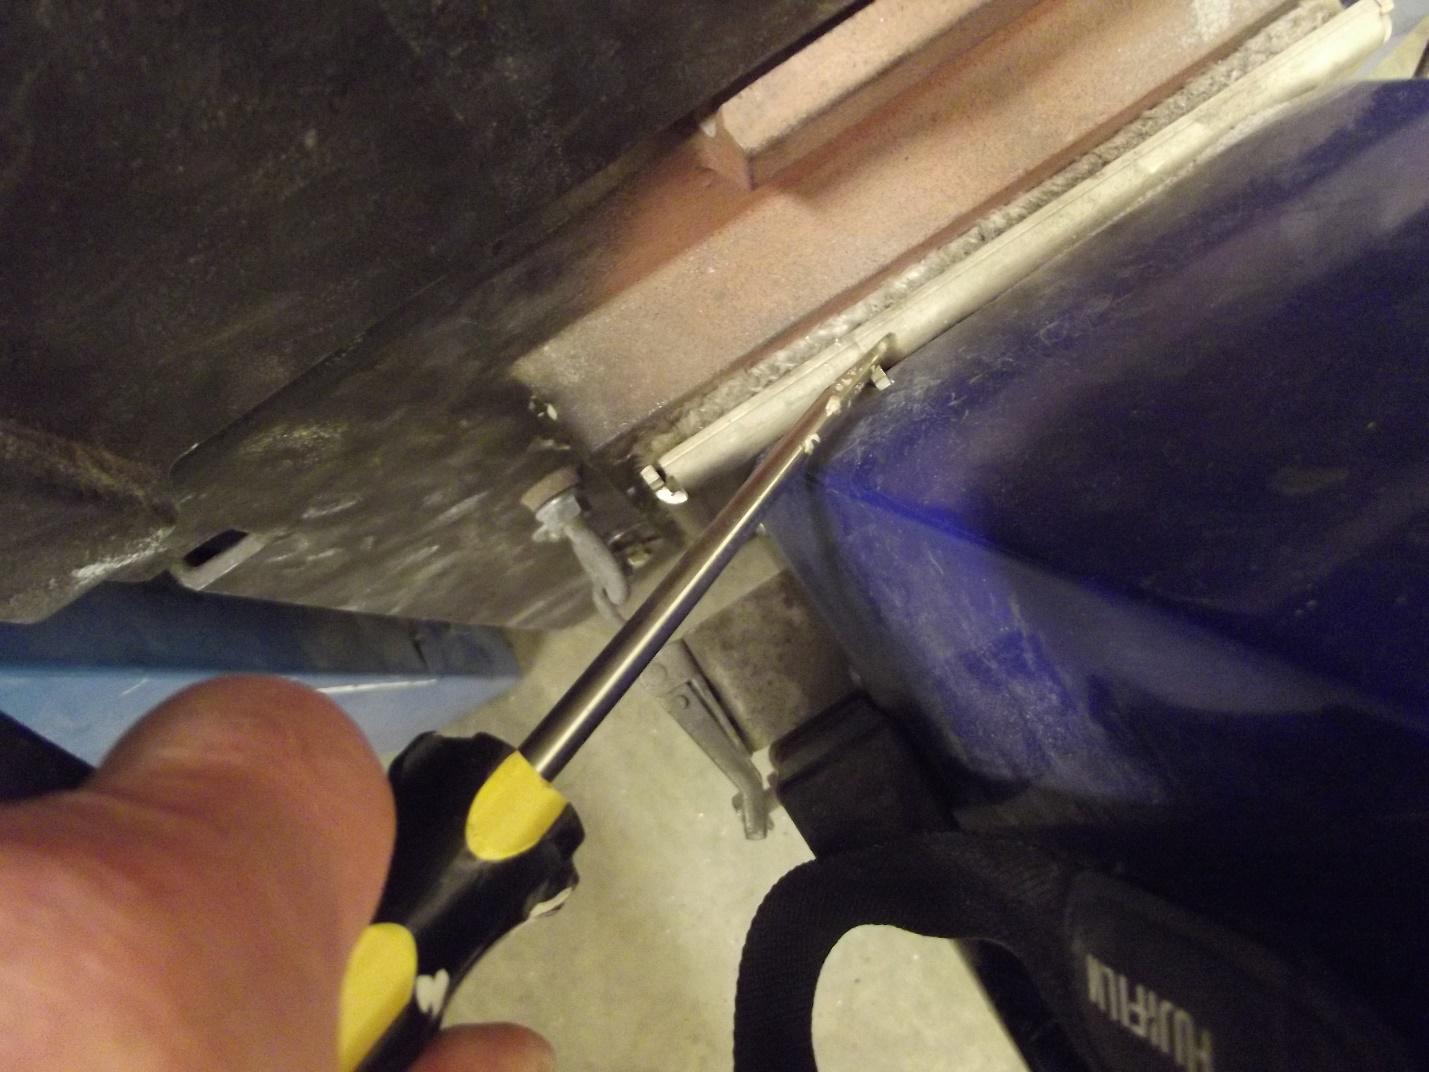 Image of "Safety Switch Plunger" pushed back with a flat-head screwdriver